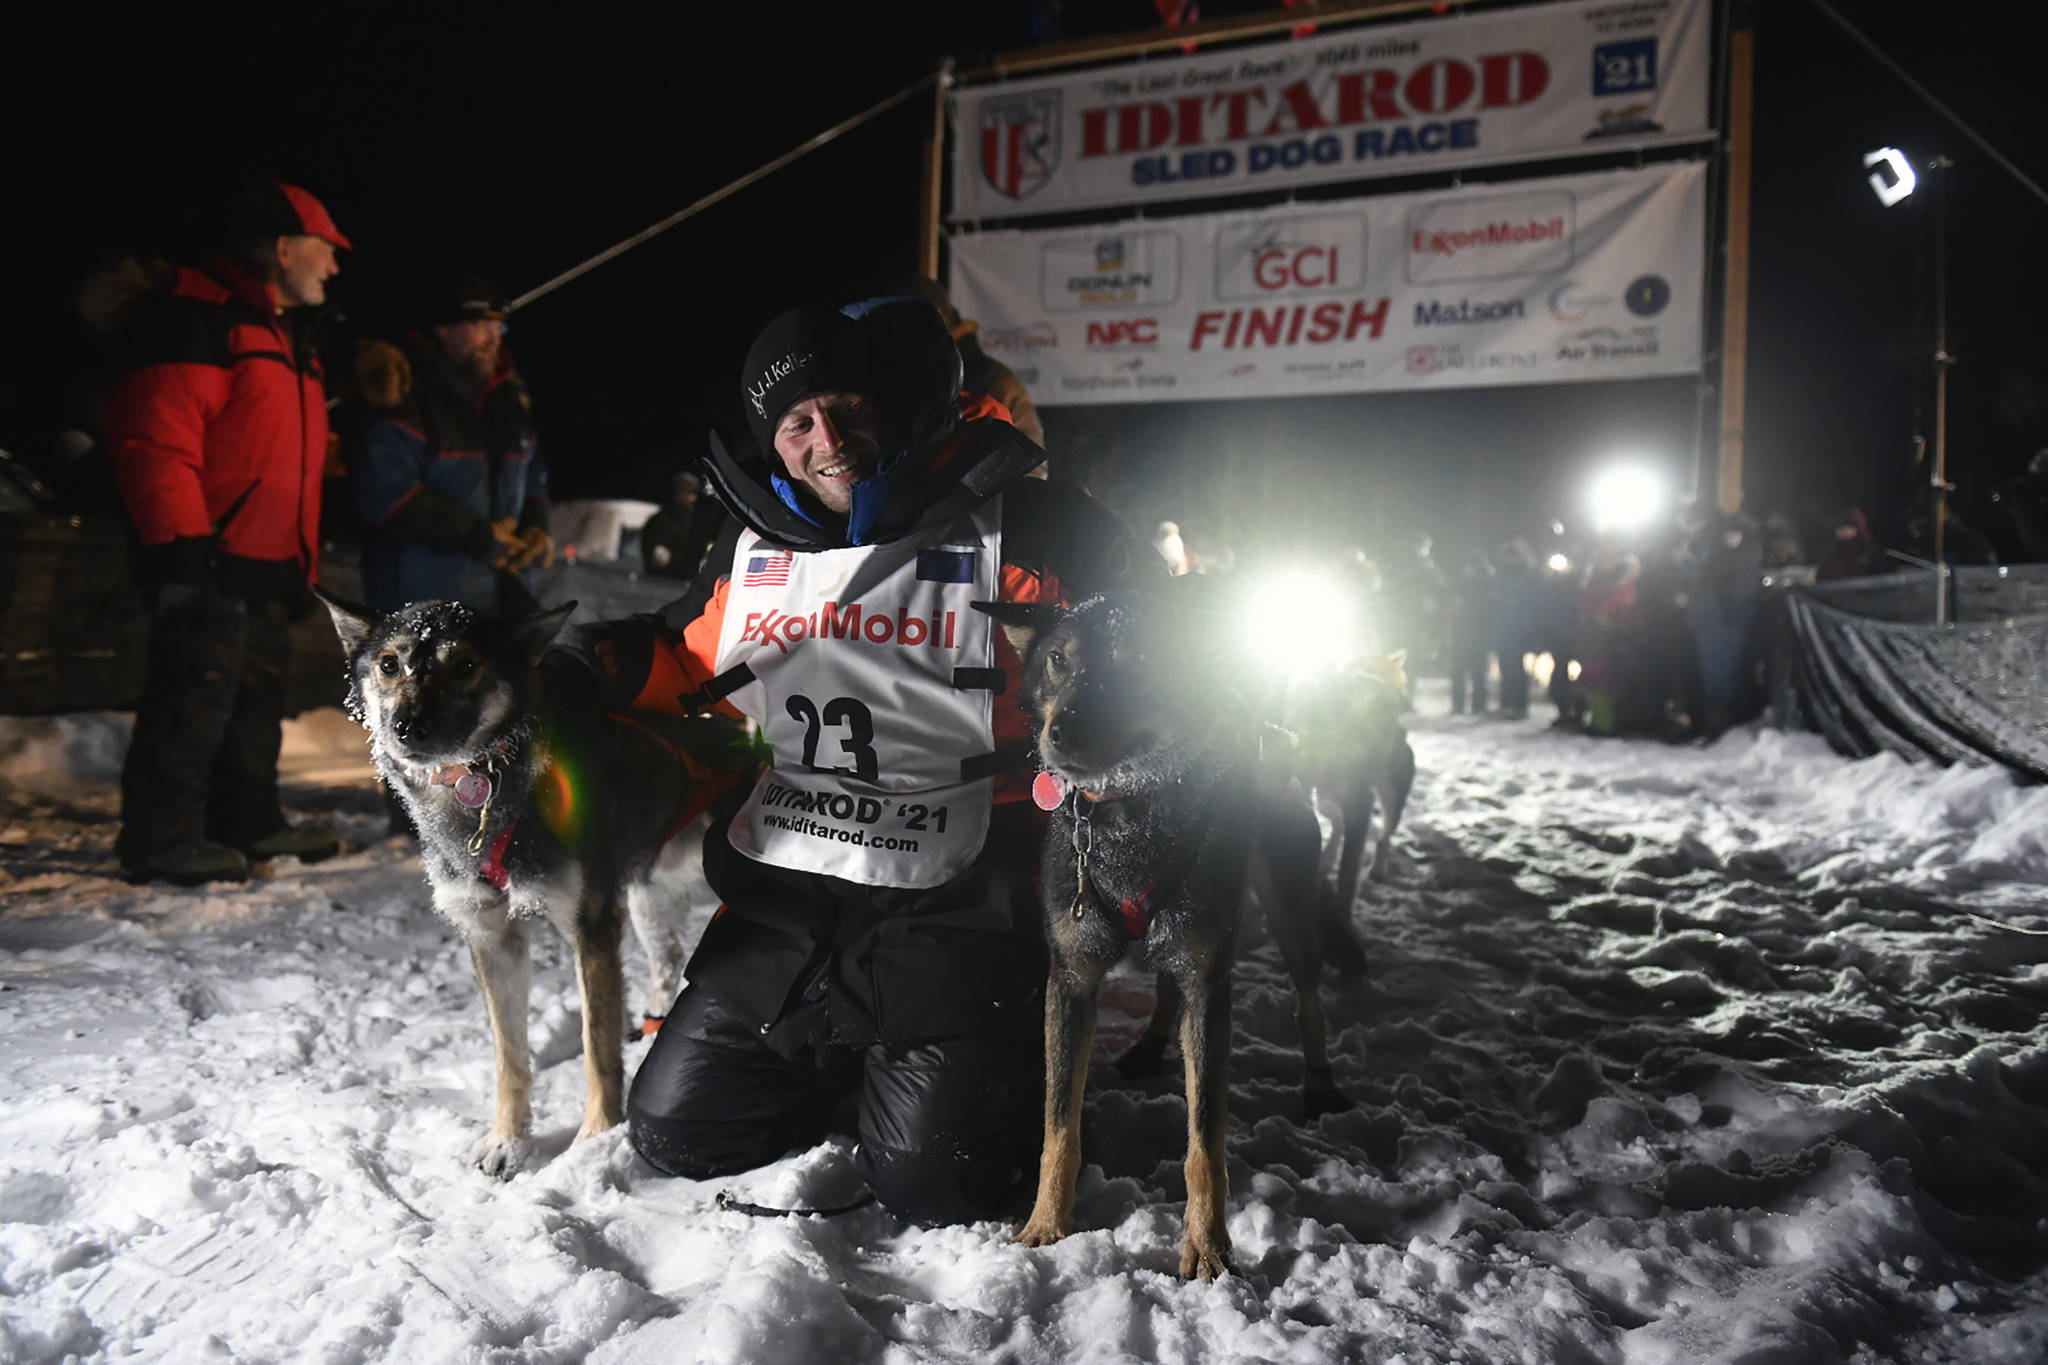 Dallas Seavey poses with his dogs after crossing the finish line to win the Iditarod Trail Sled Dog Race race near Willow, Alaska, early Monday, March 15, 2021. (Marc Lester/Anchorage Daily News via AP, Pool)